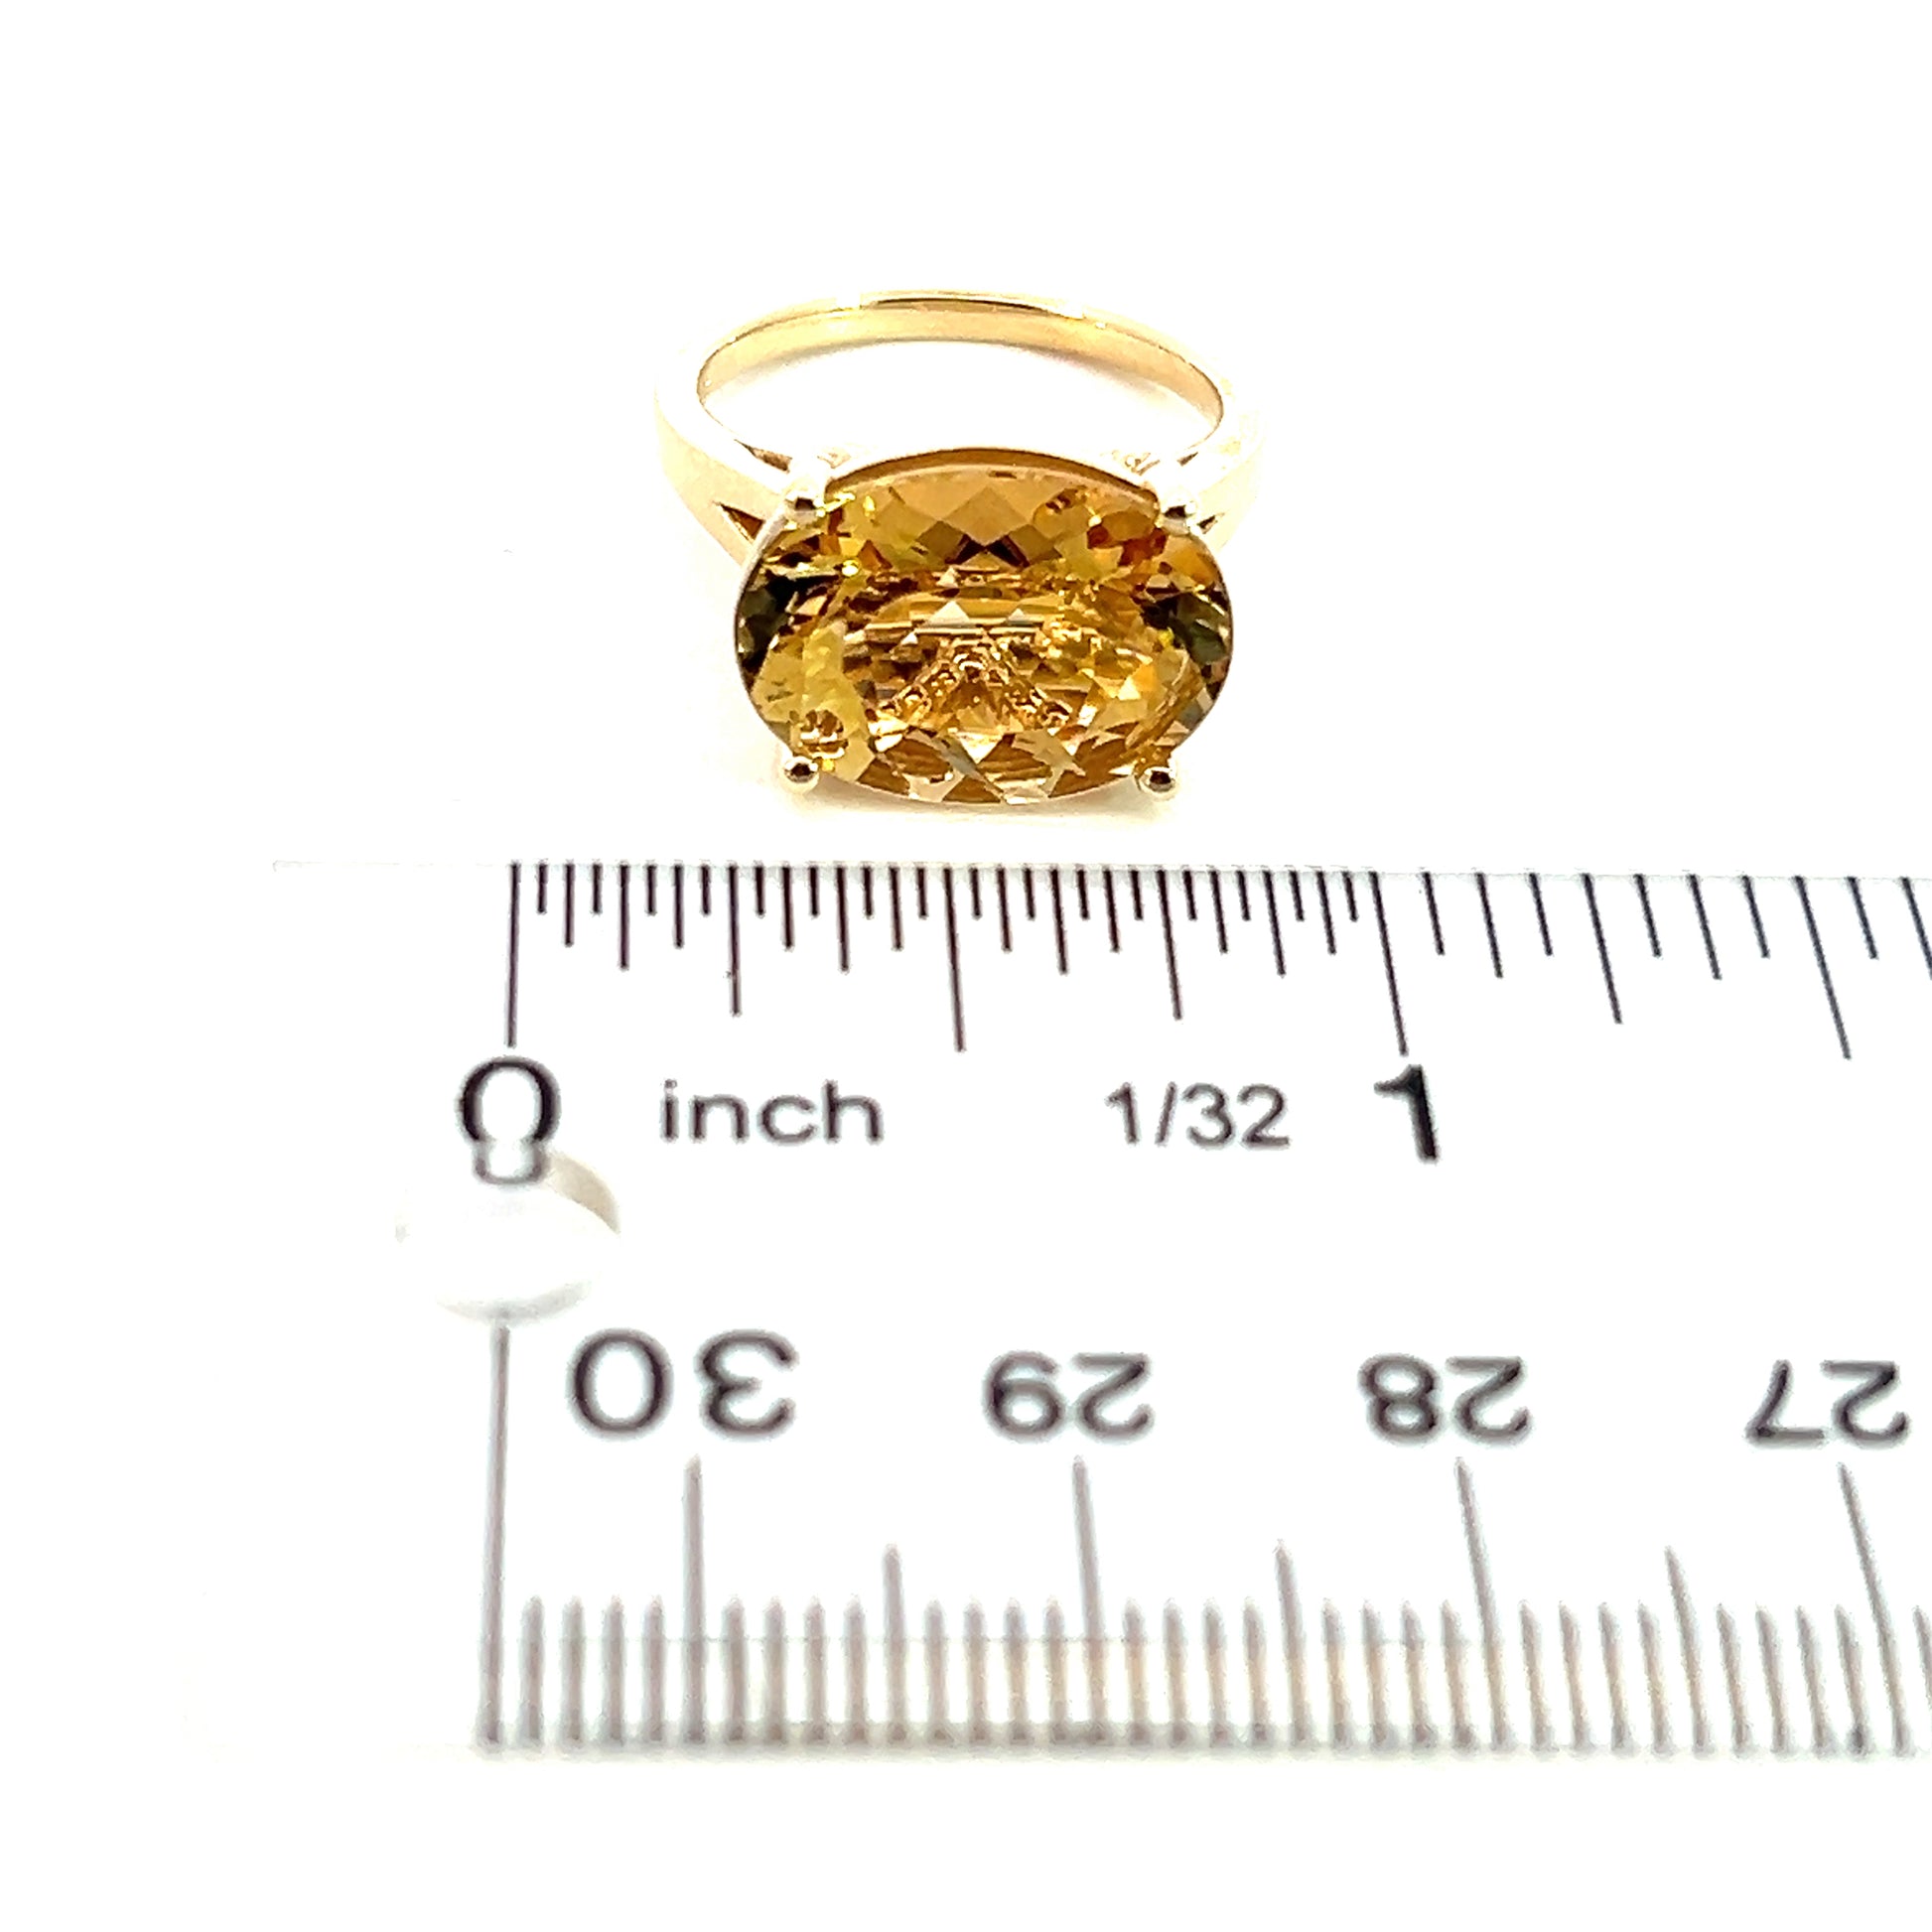 Natural Solitaire Citrine Ring 6.5 14k Y Gold 5.47 Cts Certified $2,950 310626 - Certified Fine Jewelry